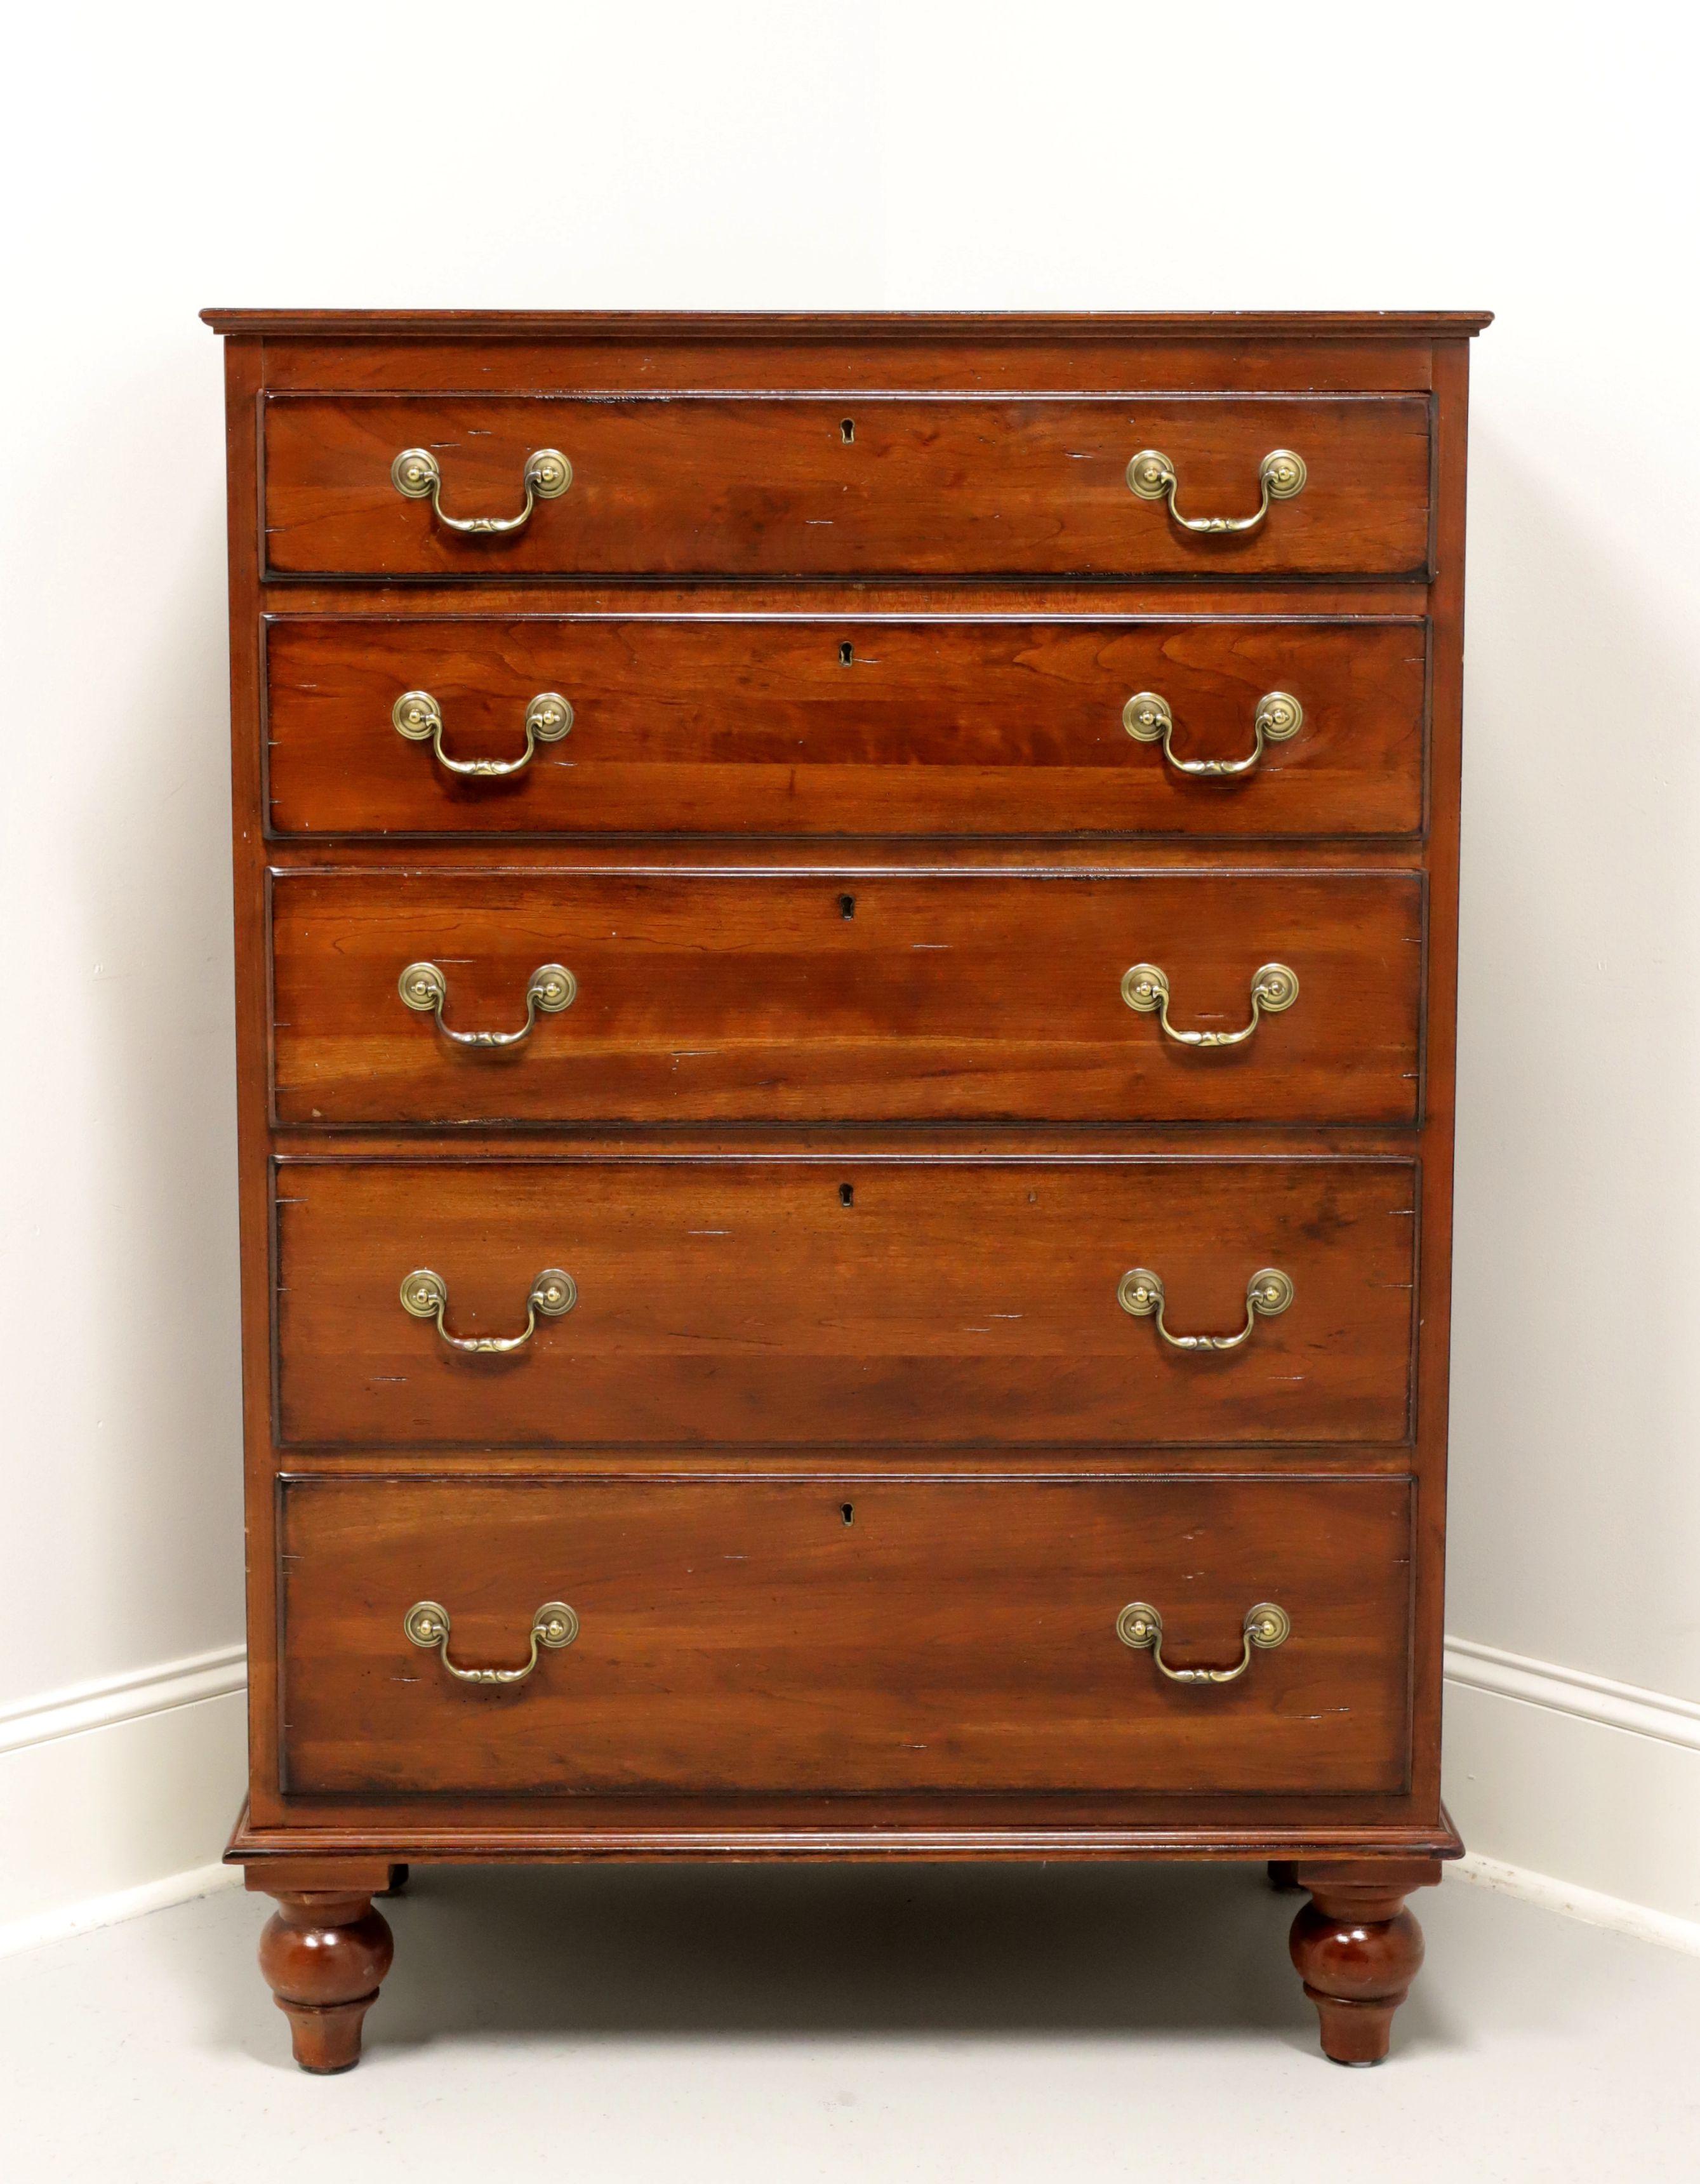 A Chippendale style chest of drawers from quality furniture maker Lexington, from their Bob Timberlake collection. Solid cherry with a distressed finish, paneled sides, brass hardware and tall turnip feet. Features five various size drawers of